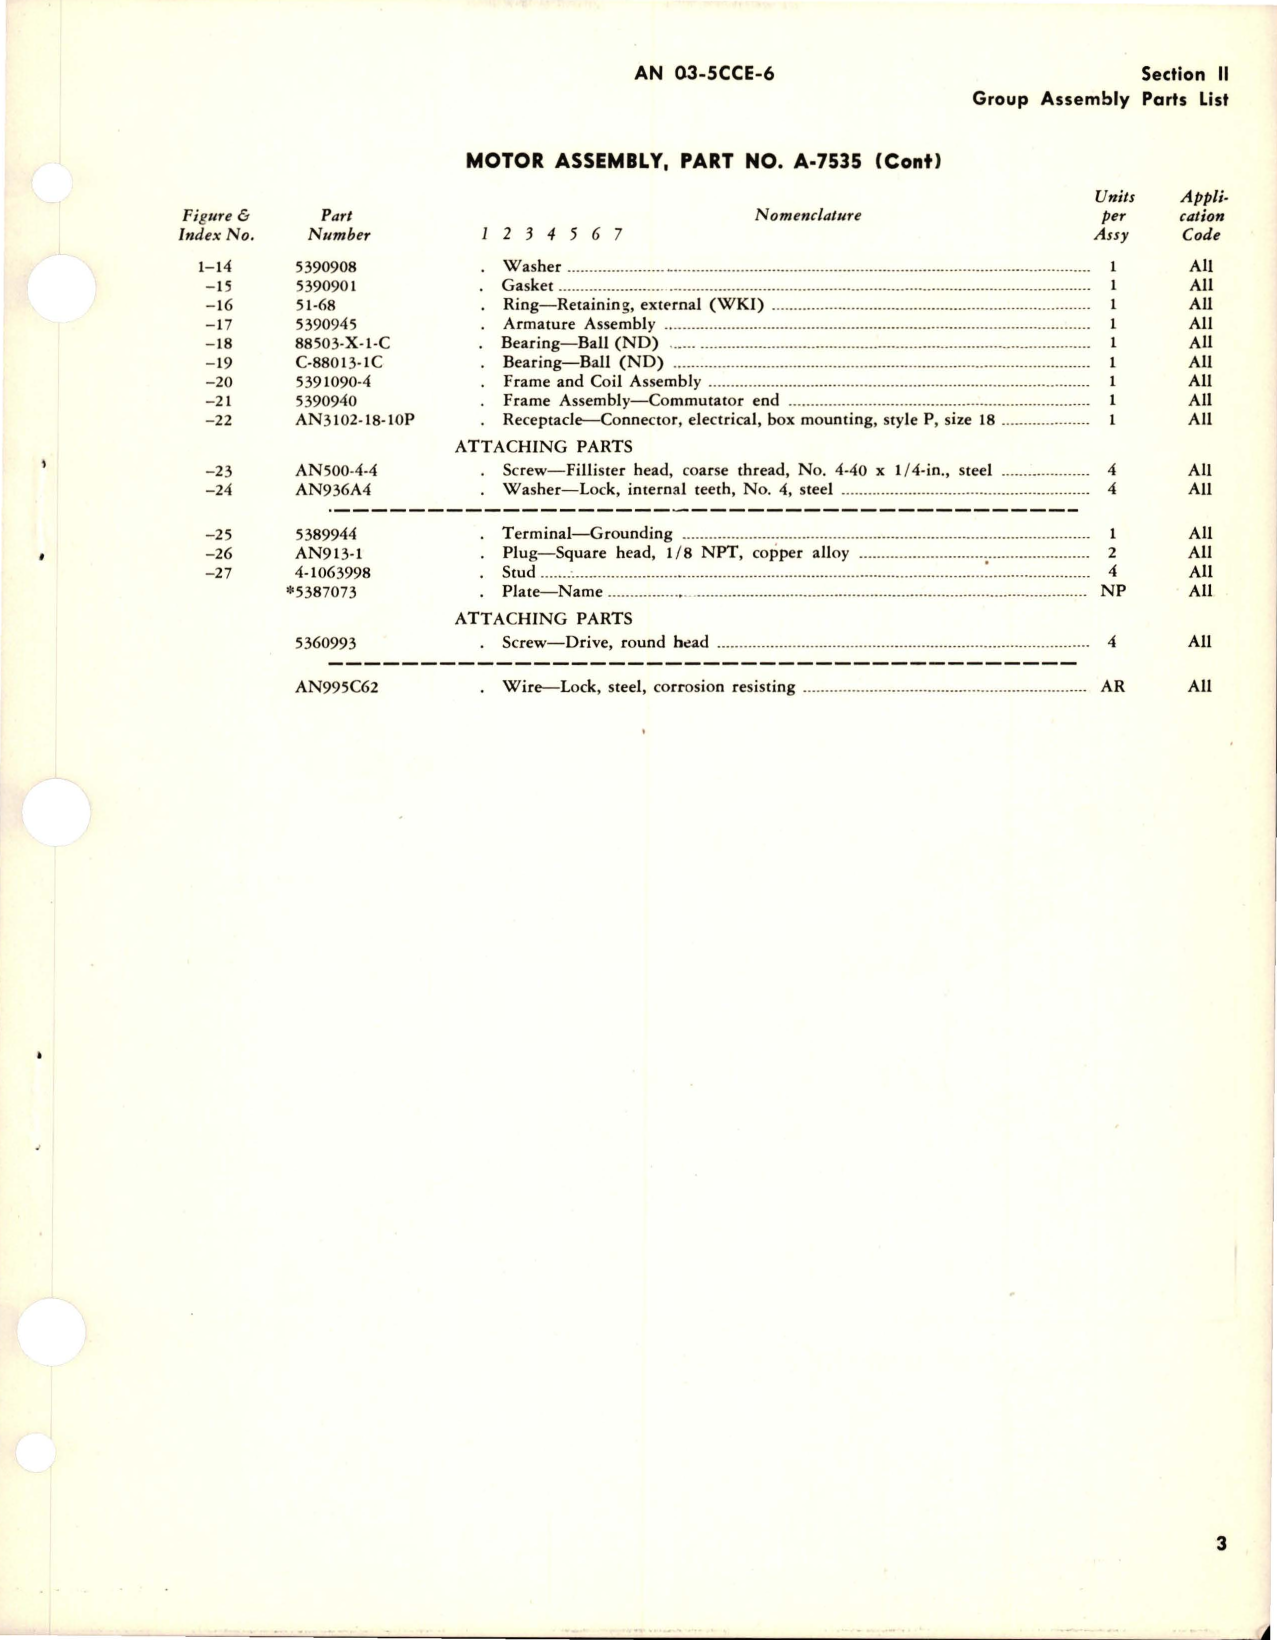 Sample page 5 from AirCorps Library document: Parts Catalog for Motor Assembly - Model A-7535